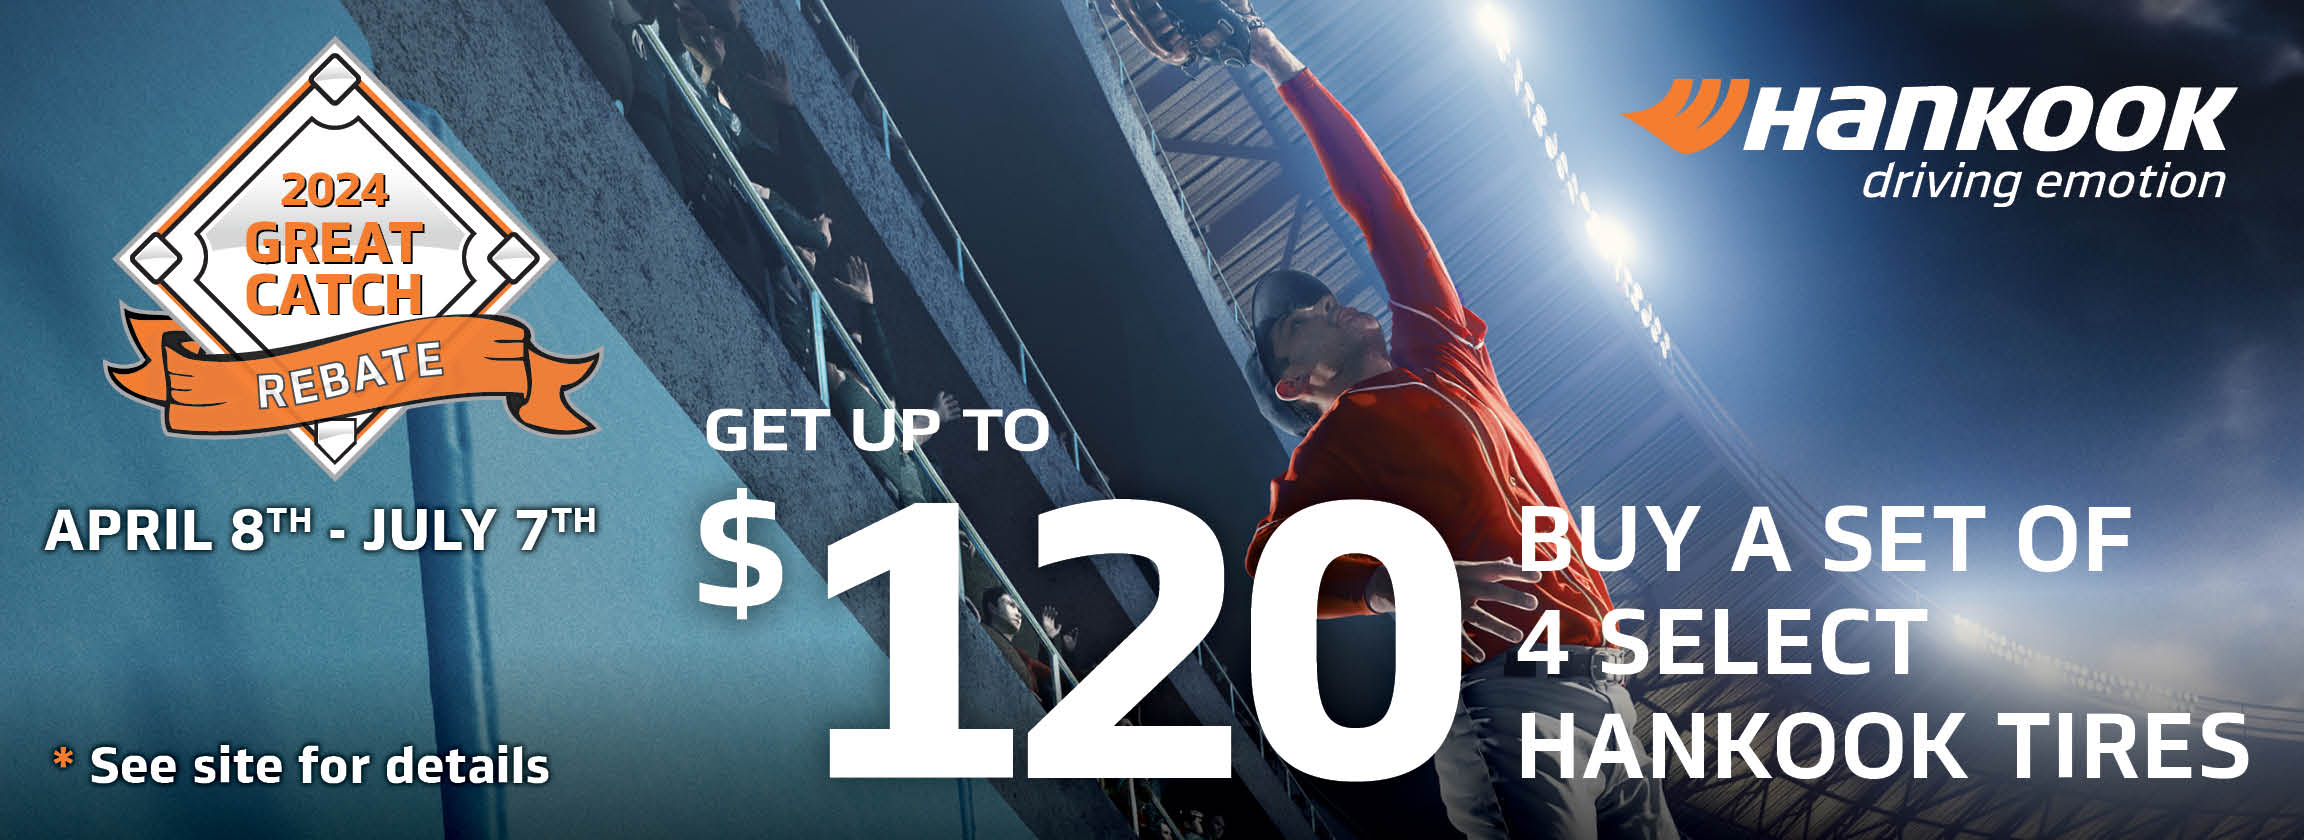 2024 GREAT CATCH REBATE GET UP TO $120 BUY A SET OF 4 SELECT HANKOOK TIRES